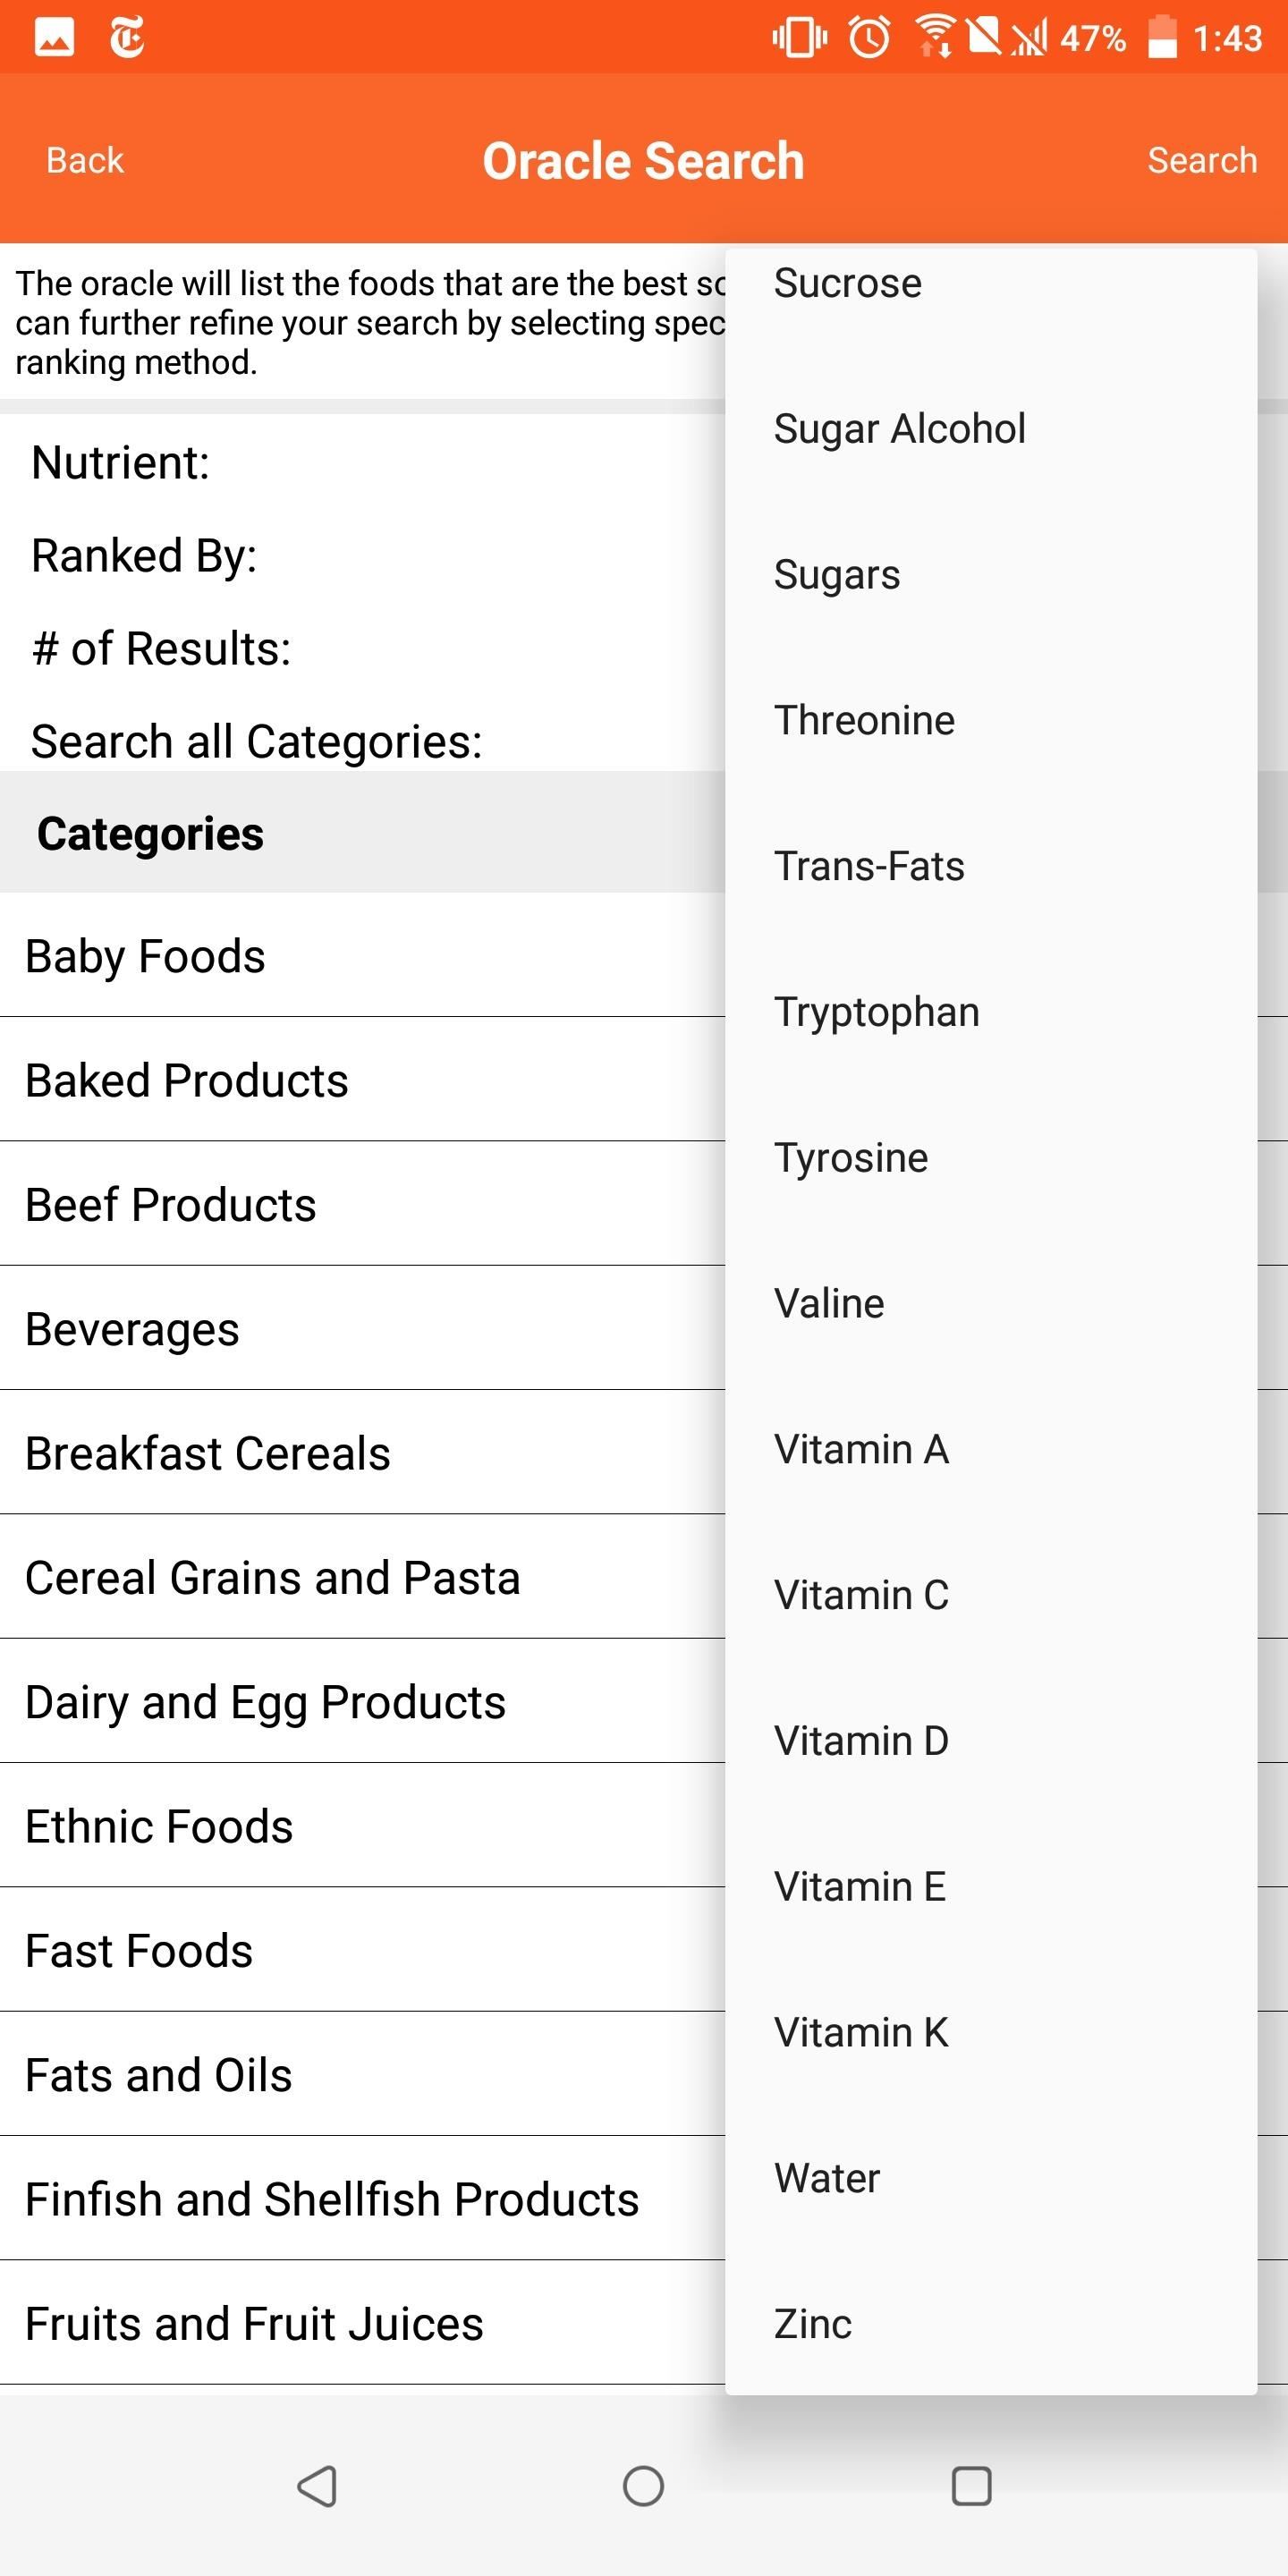 How to Track Micronutrients to Monitor Your Vitamin & Mineral Intake